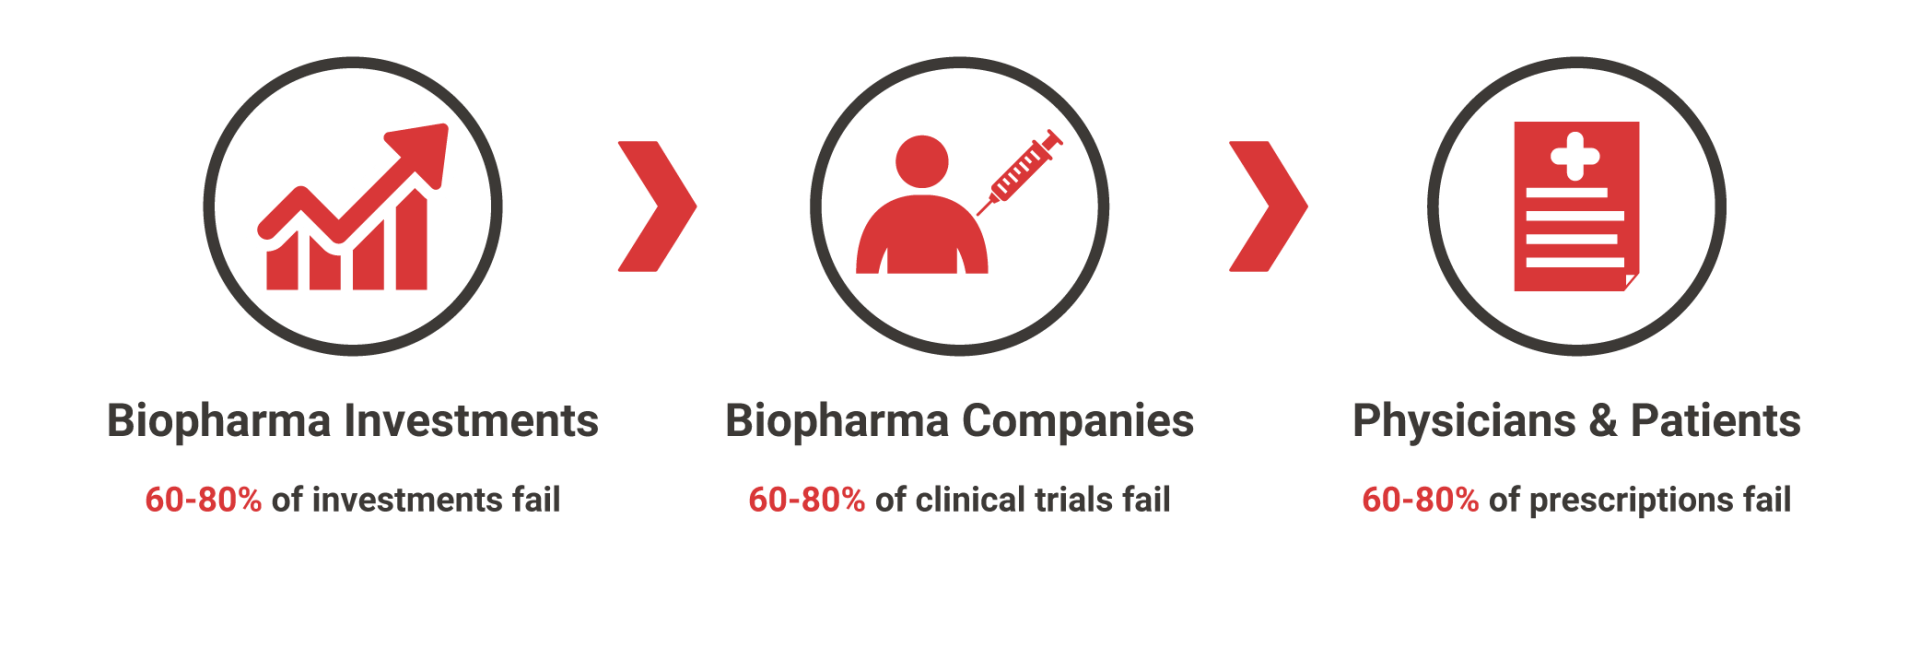 Icons showing 60-80% of Biopharma investments fail, 60-80% of clinical trials fail, 60-80% of prescriptions fail